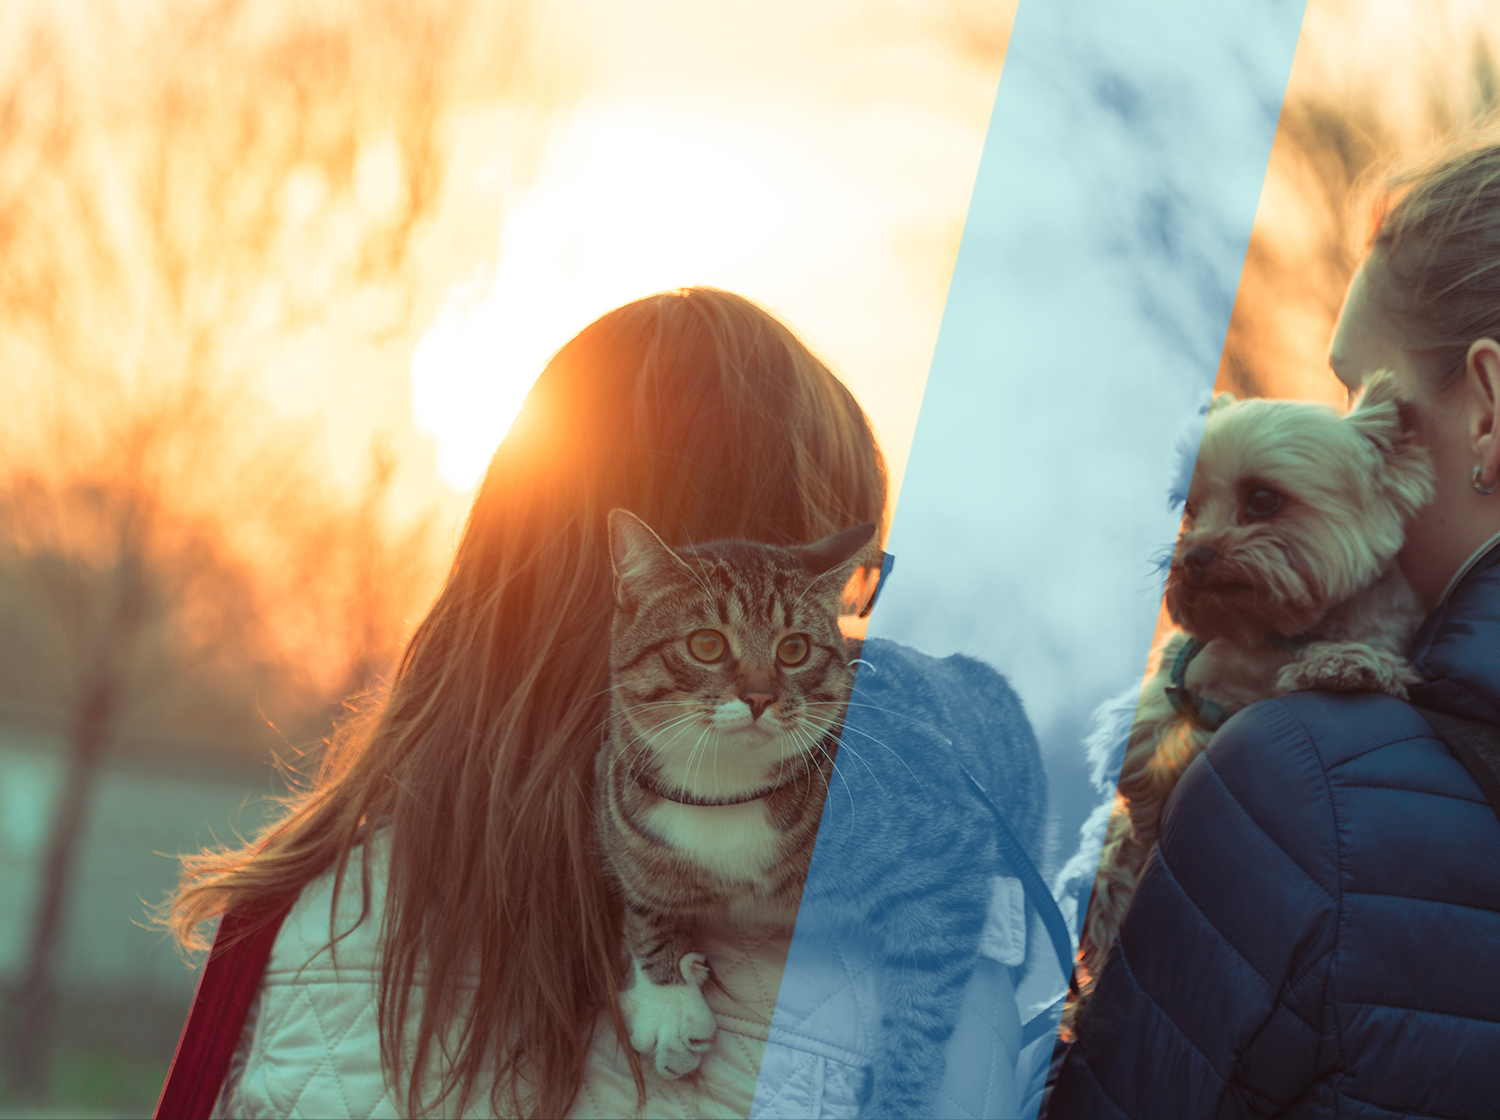 2 people standing watching the sunset, left hand person is holding a cat and right hand person is holding a dog